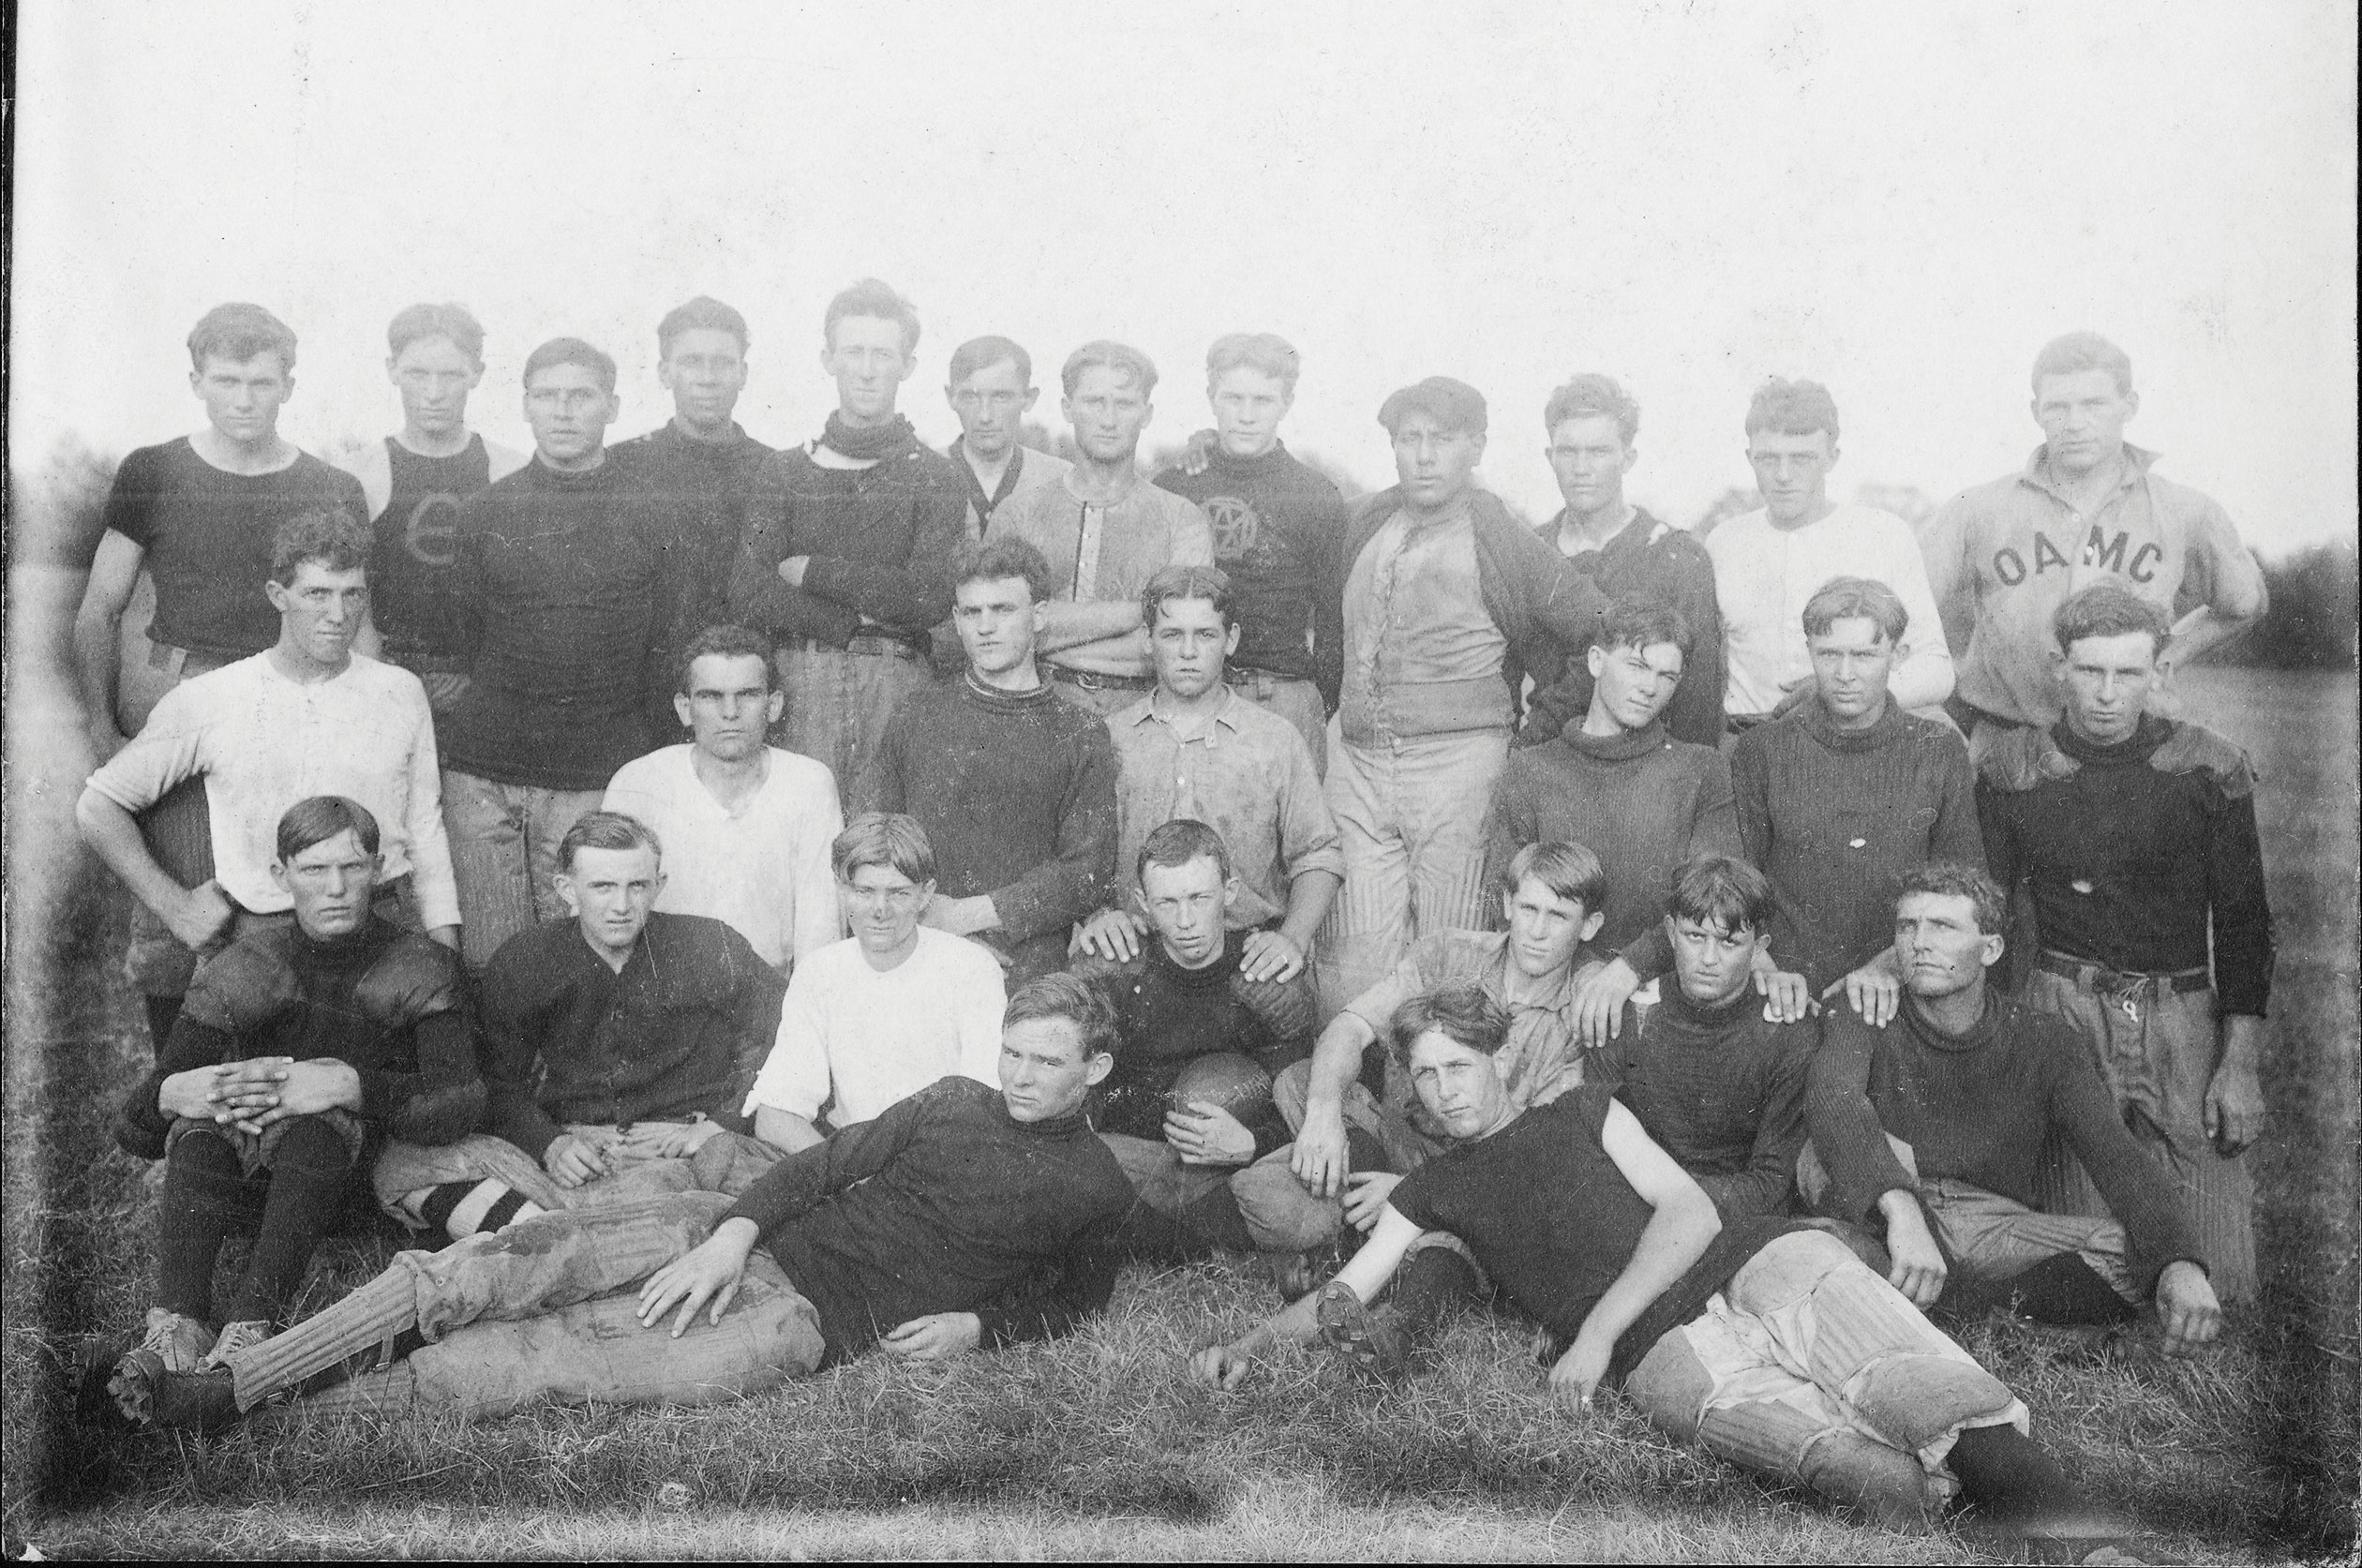 The 1908 football team and practice squad gathers for a picture. Ed Gallagher is on the back row upper left corner, Coach Ed Parry is in the upper right wearing the OAMC shirt and Clark Oursler is in the third row second from the left wearing a white shirt.